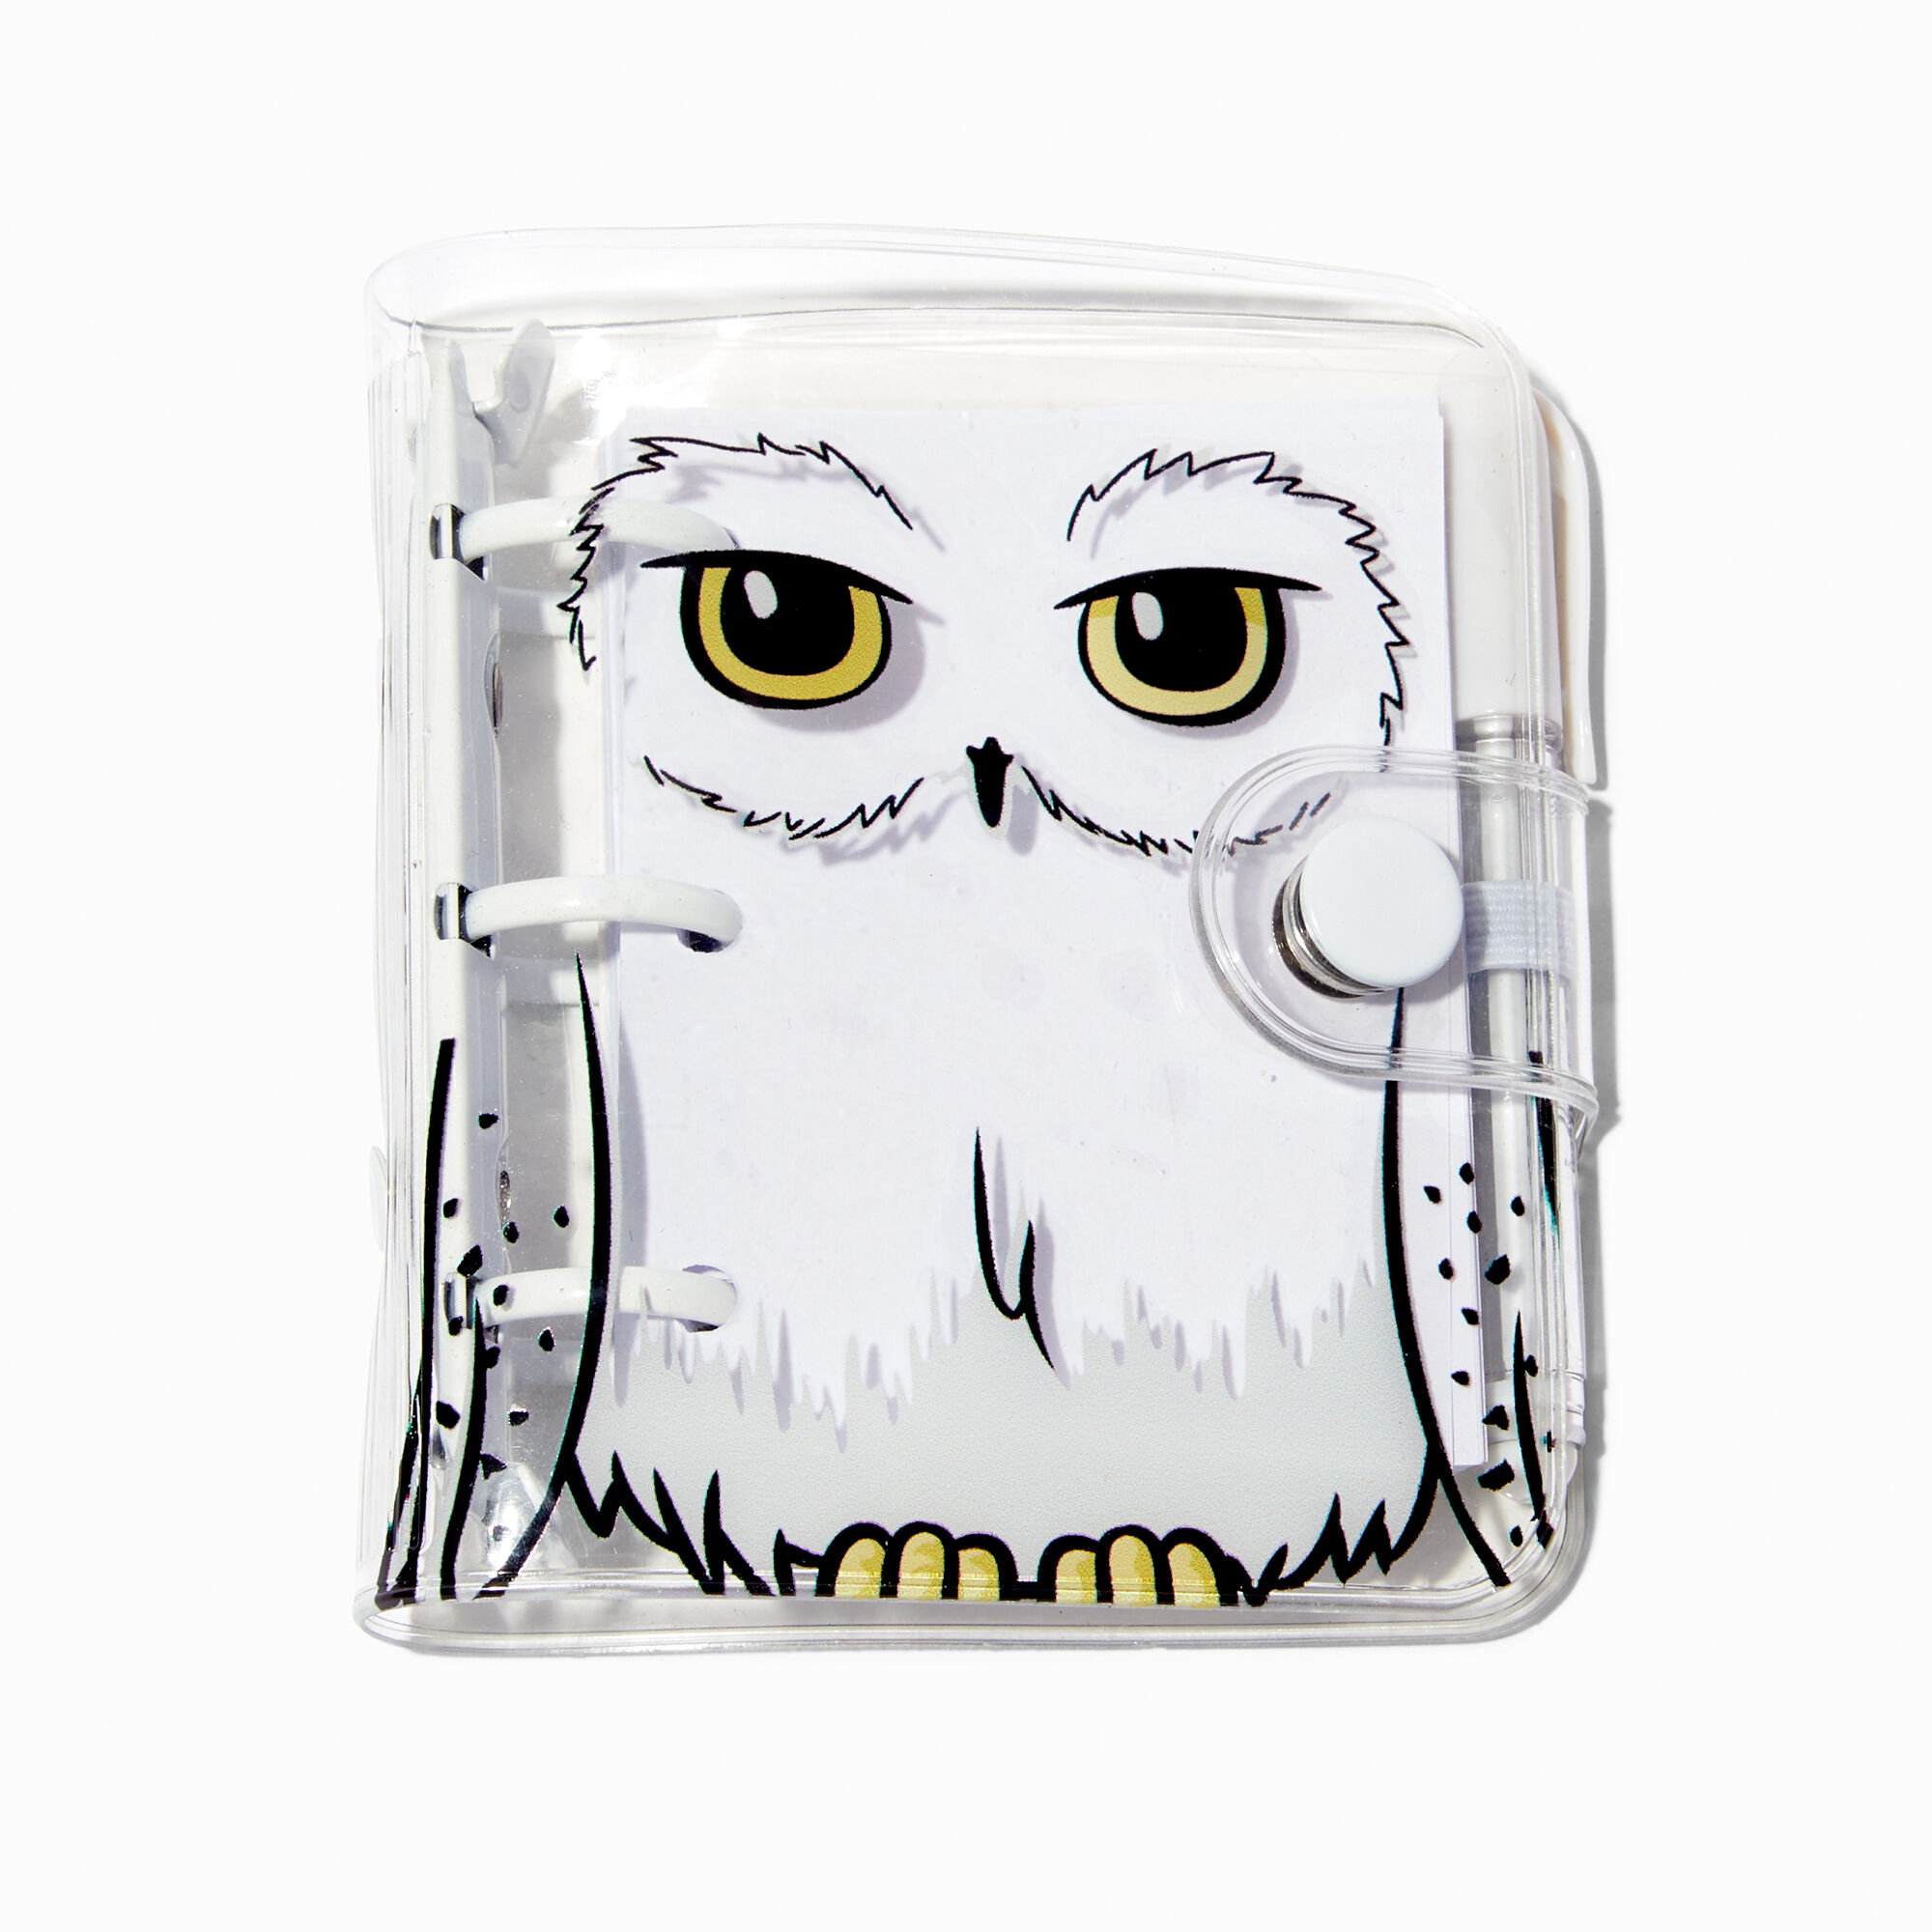 View Claires Harry Potter Hedwig Mini Planner Notebook information